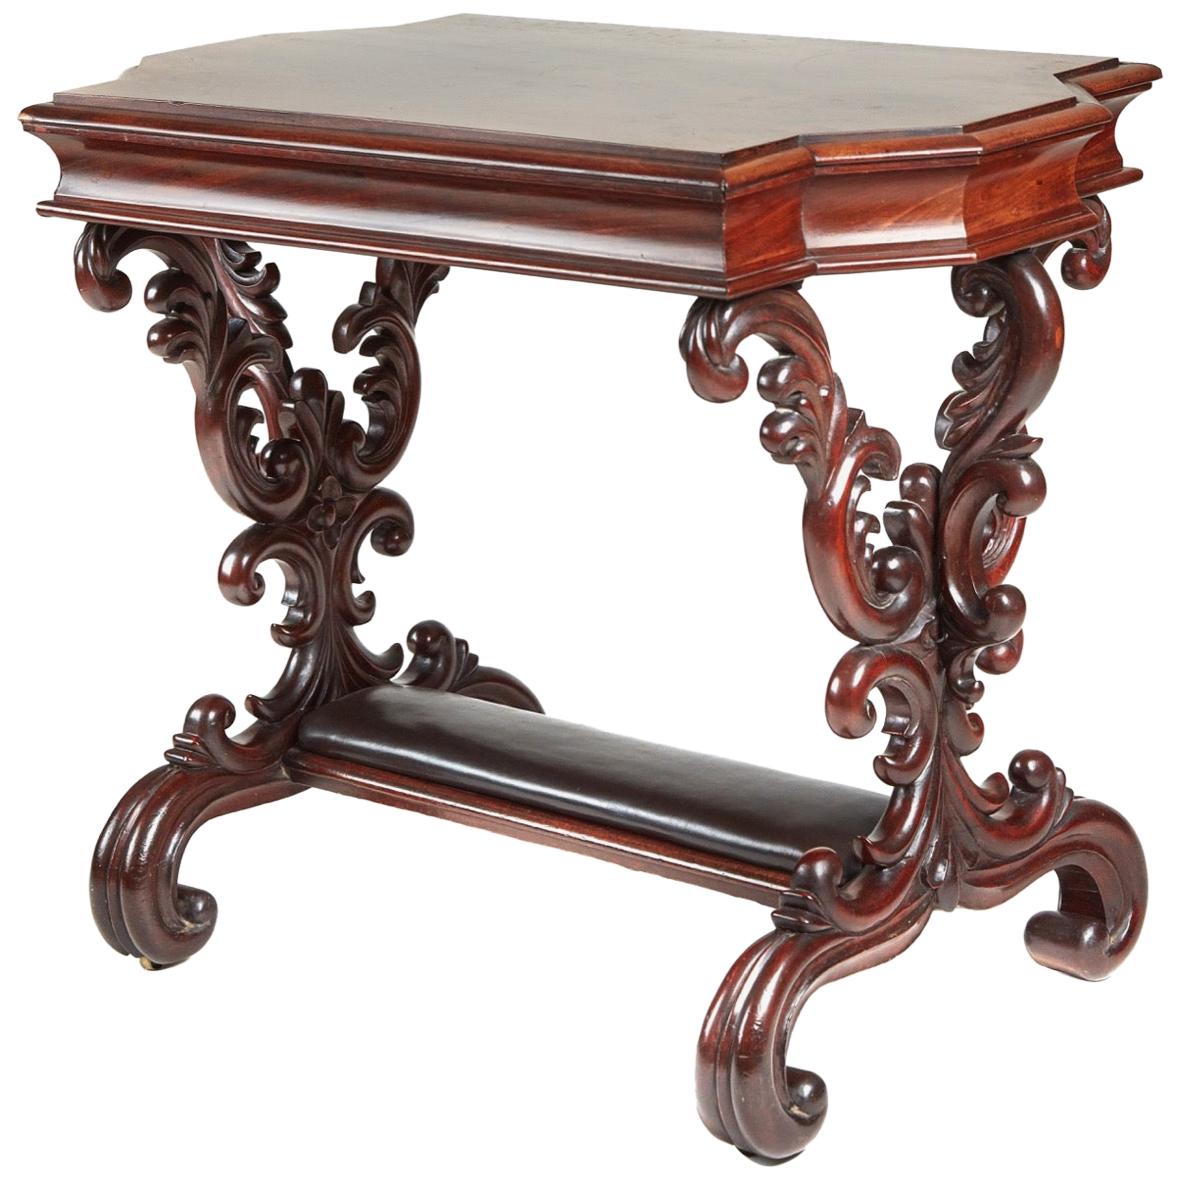 Outstanding Quality Carved Antique Mahogany Centre Table, circa 1850 For Sale